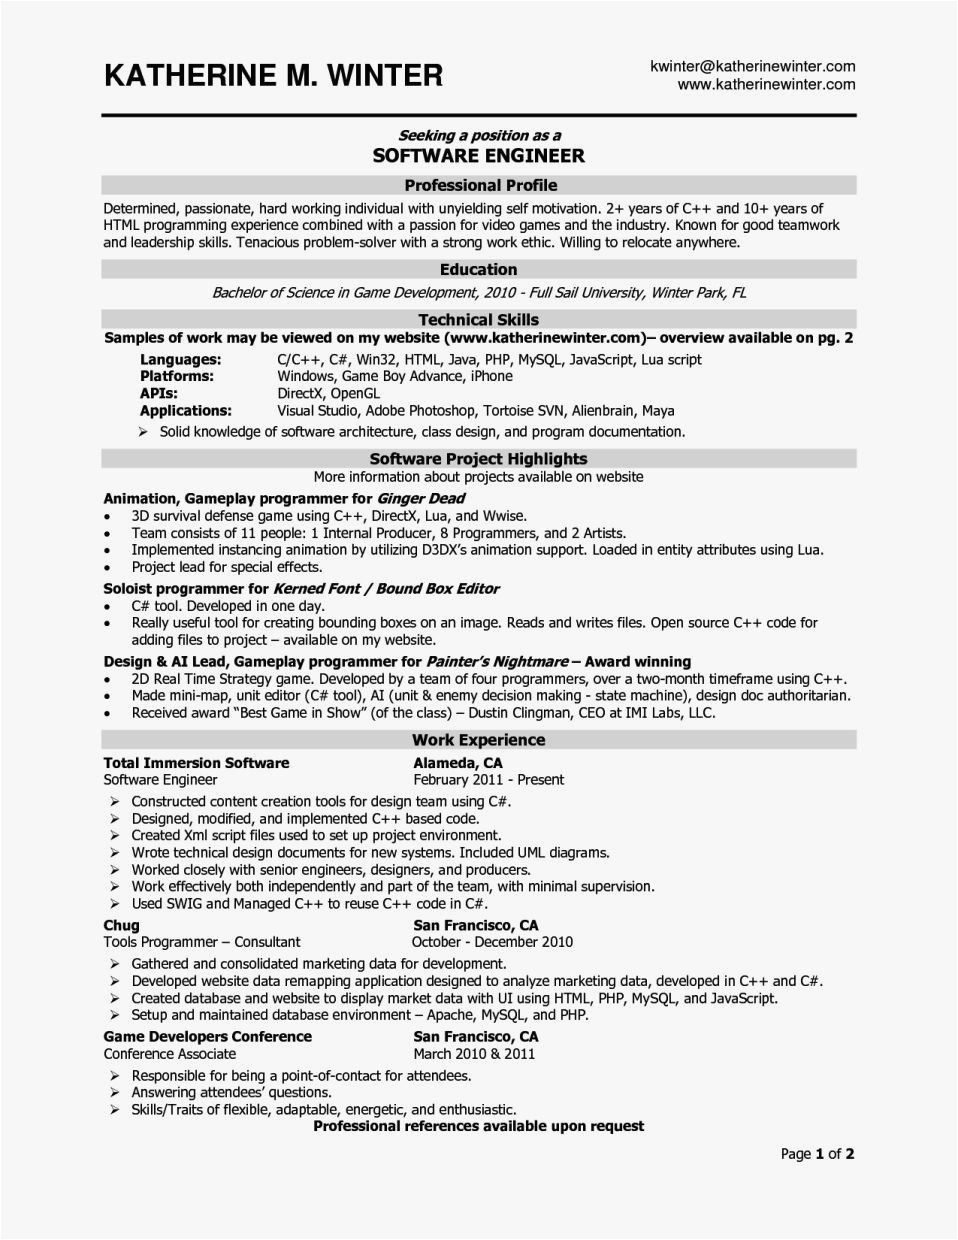 Resume Samples for Experienced software Professionals Inspirational Experience Resume format for software Developer In 2020